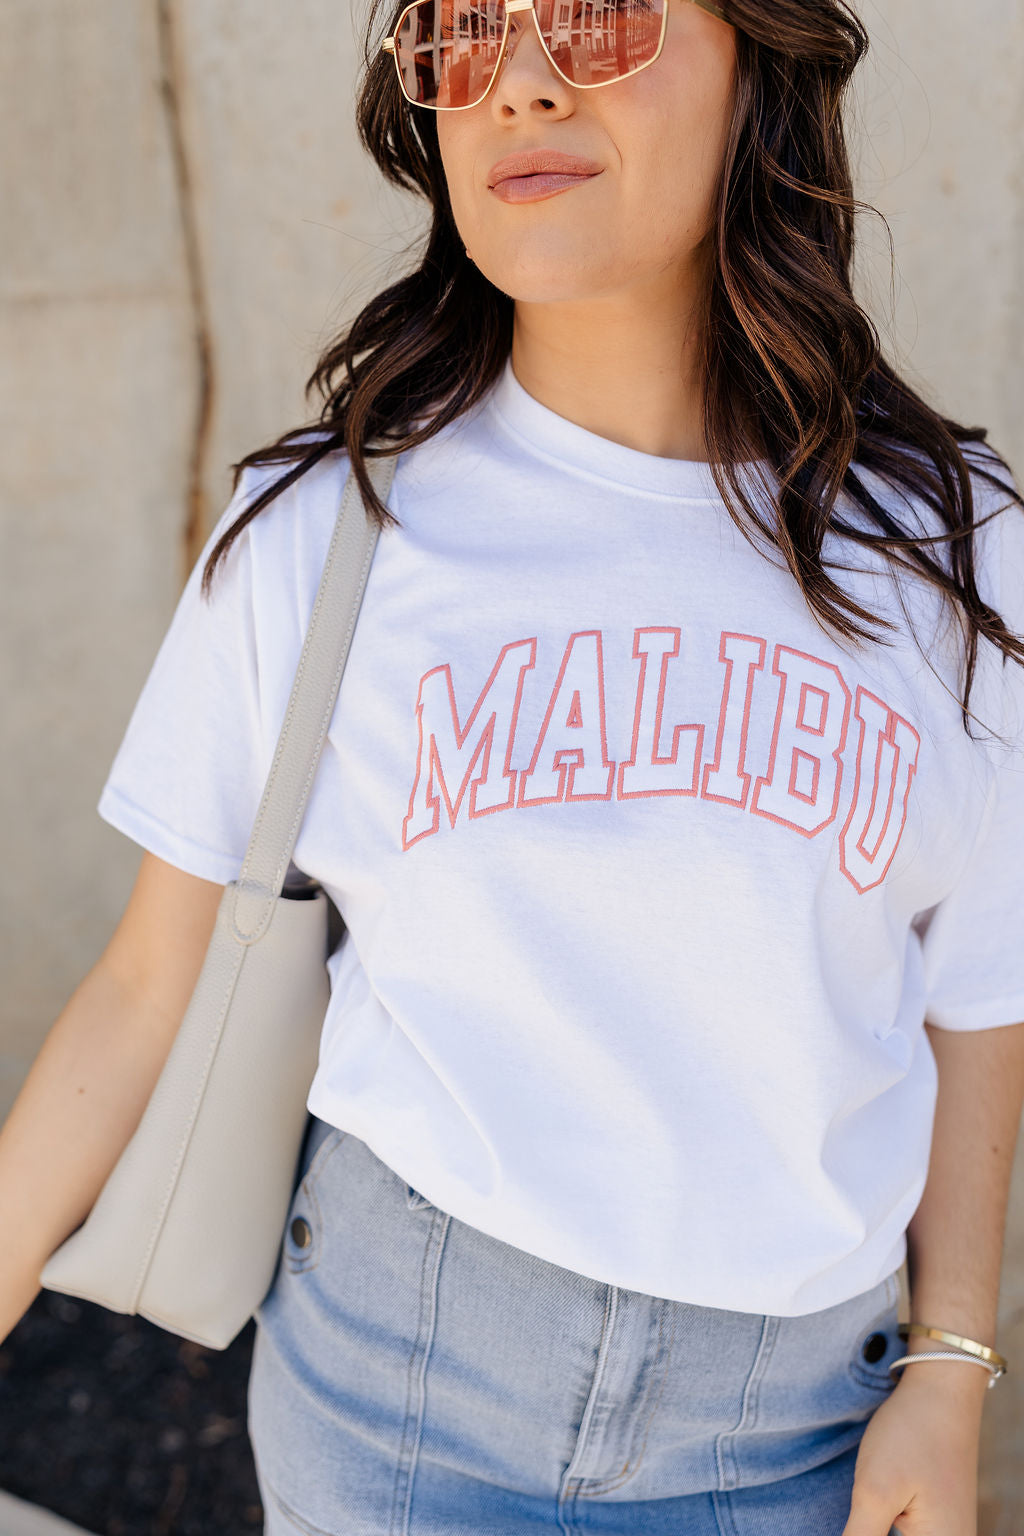 Close up view of model wearing the Malibu White & Blush Short Sleeve Graphic Top which features white knit fabic, round neckline, shirt sleeves. Graphic says "MALIBU" in block letters with blush pink stitch.